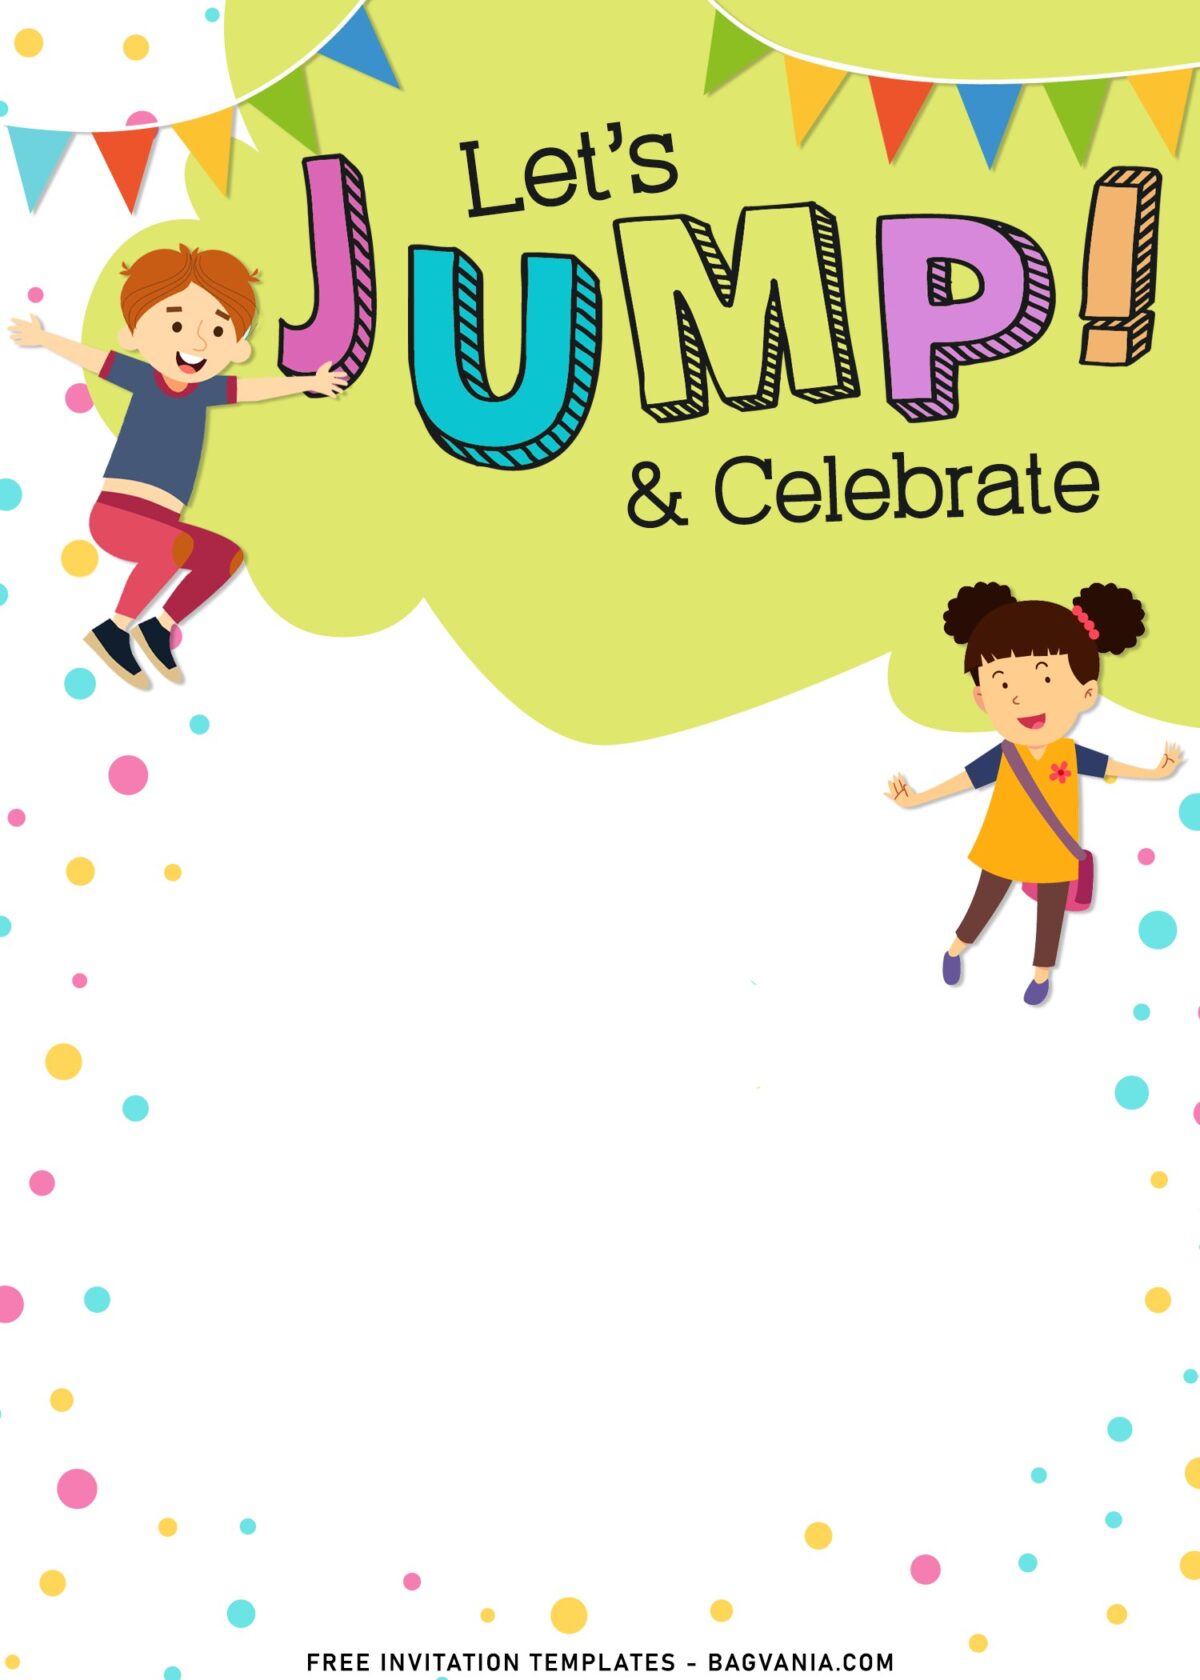 11+ Let’s Jump Party Invitation Templates For Your Kids Next Bash with 